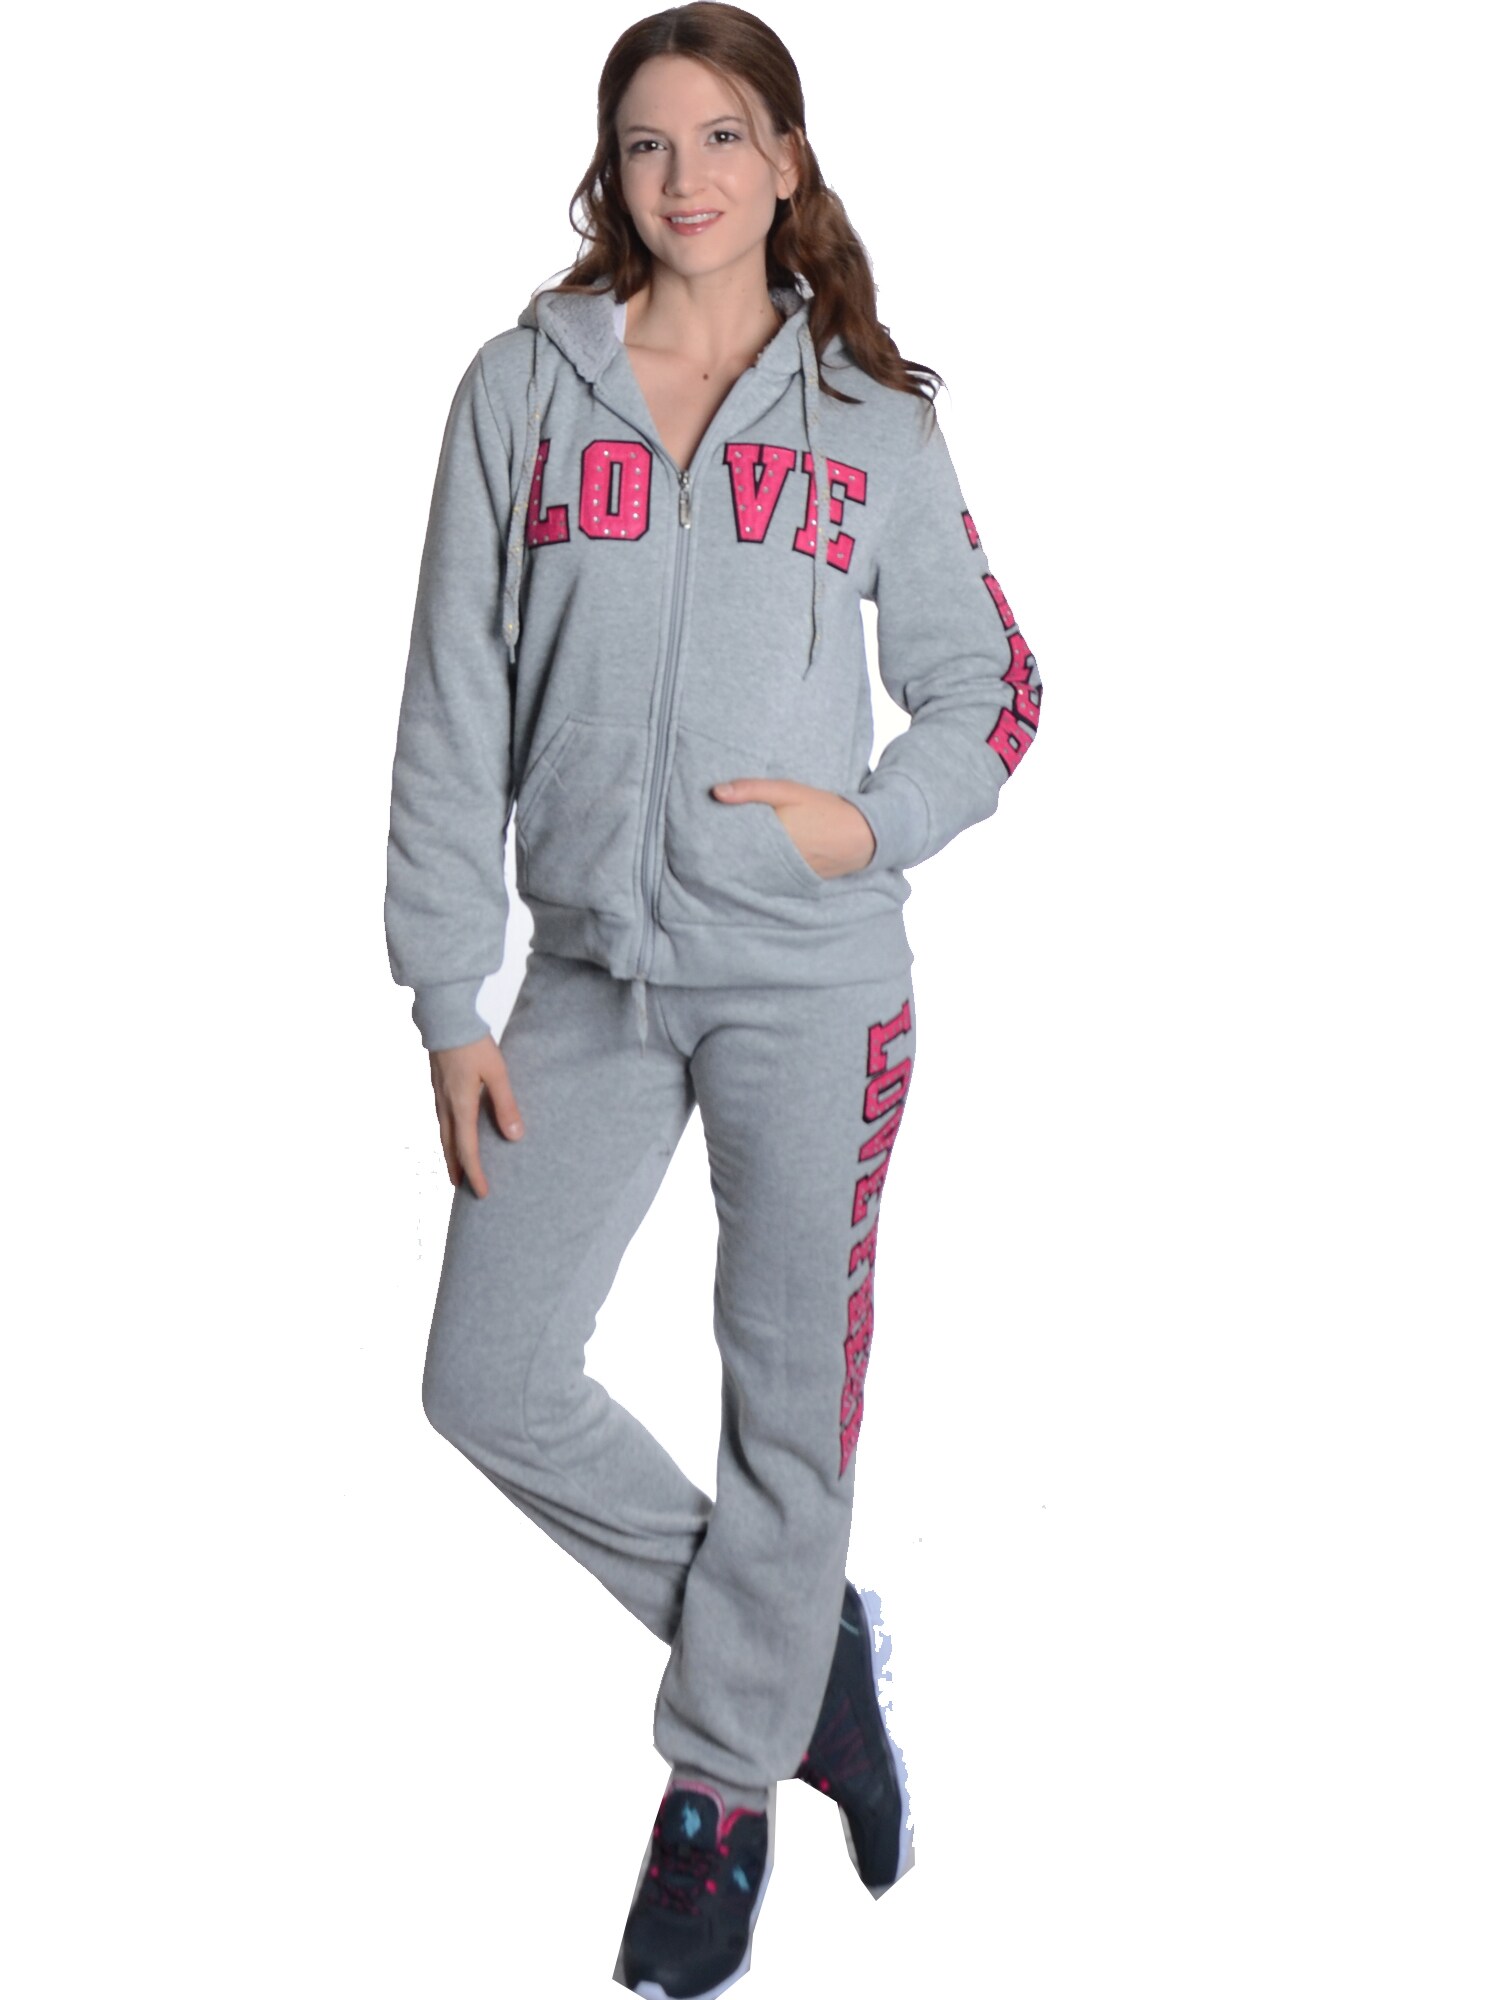 Playboy Two-piece Velour Warm-up Set - 422739 - Overstock.com Shopping ...